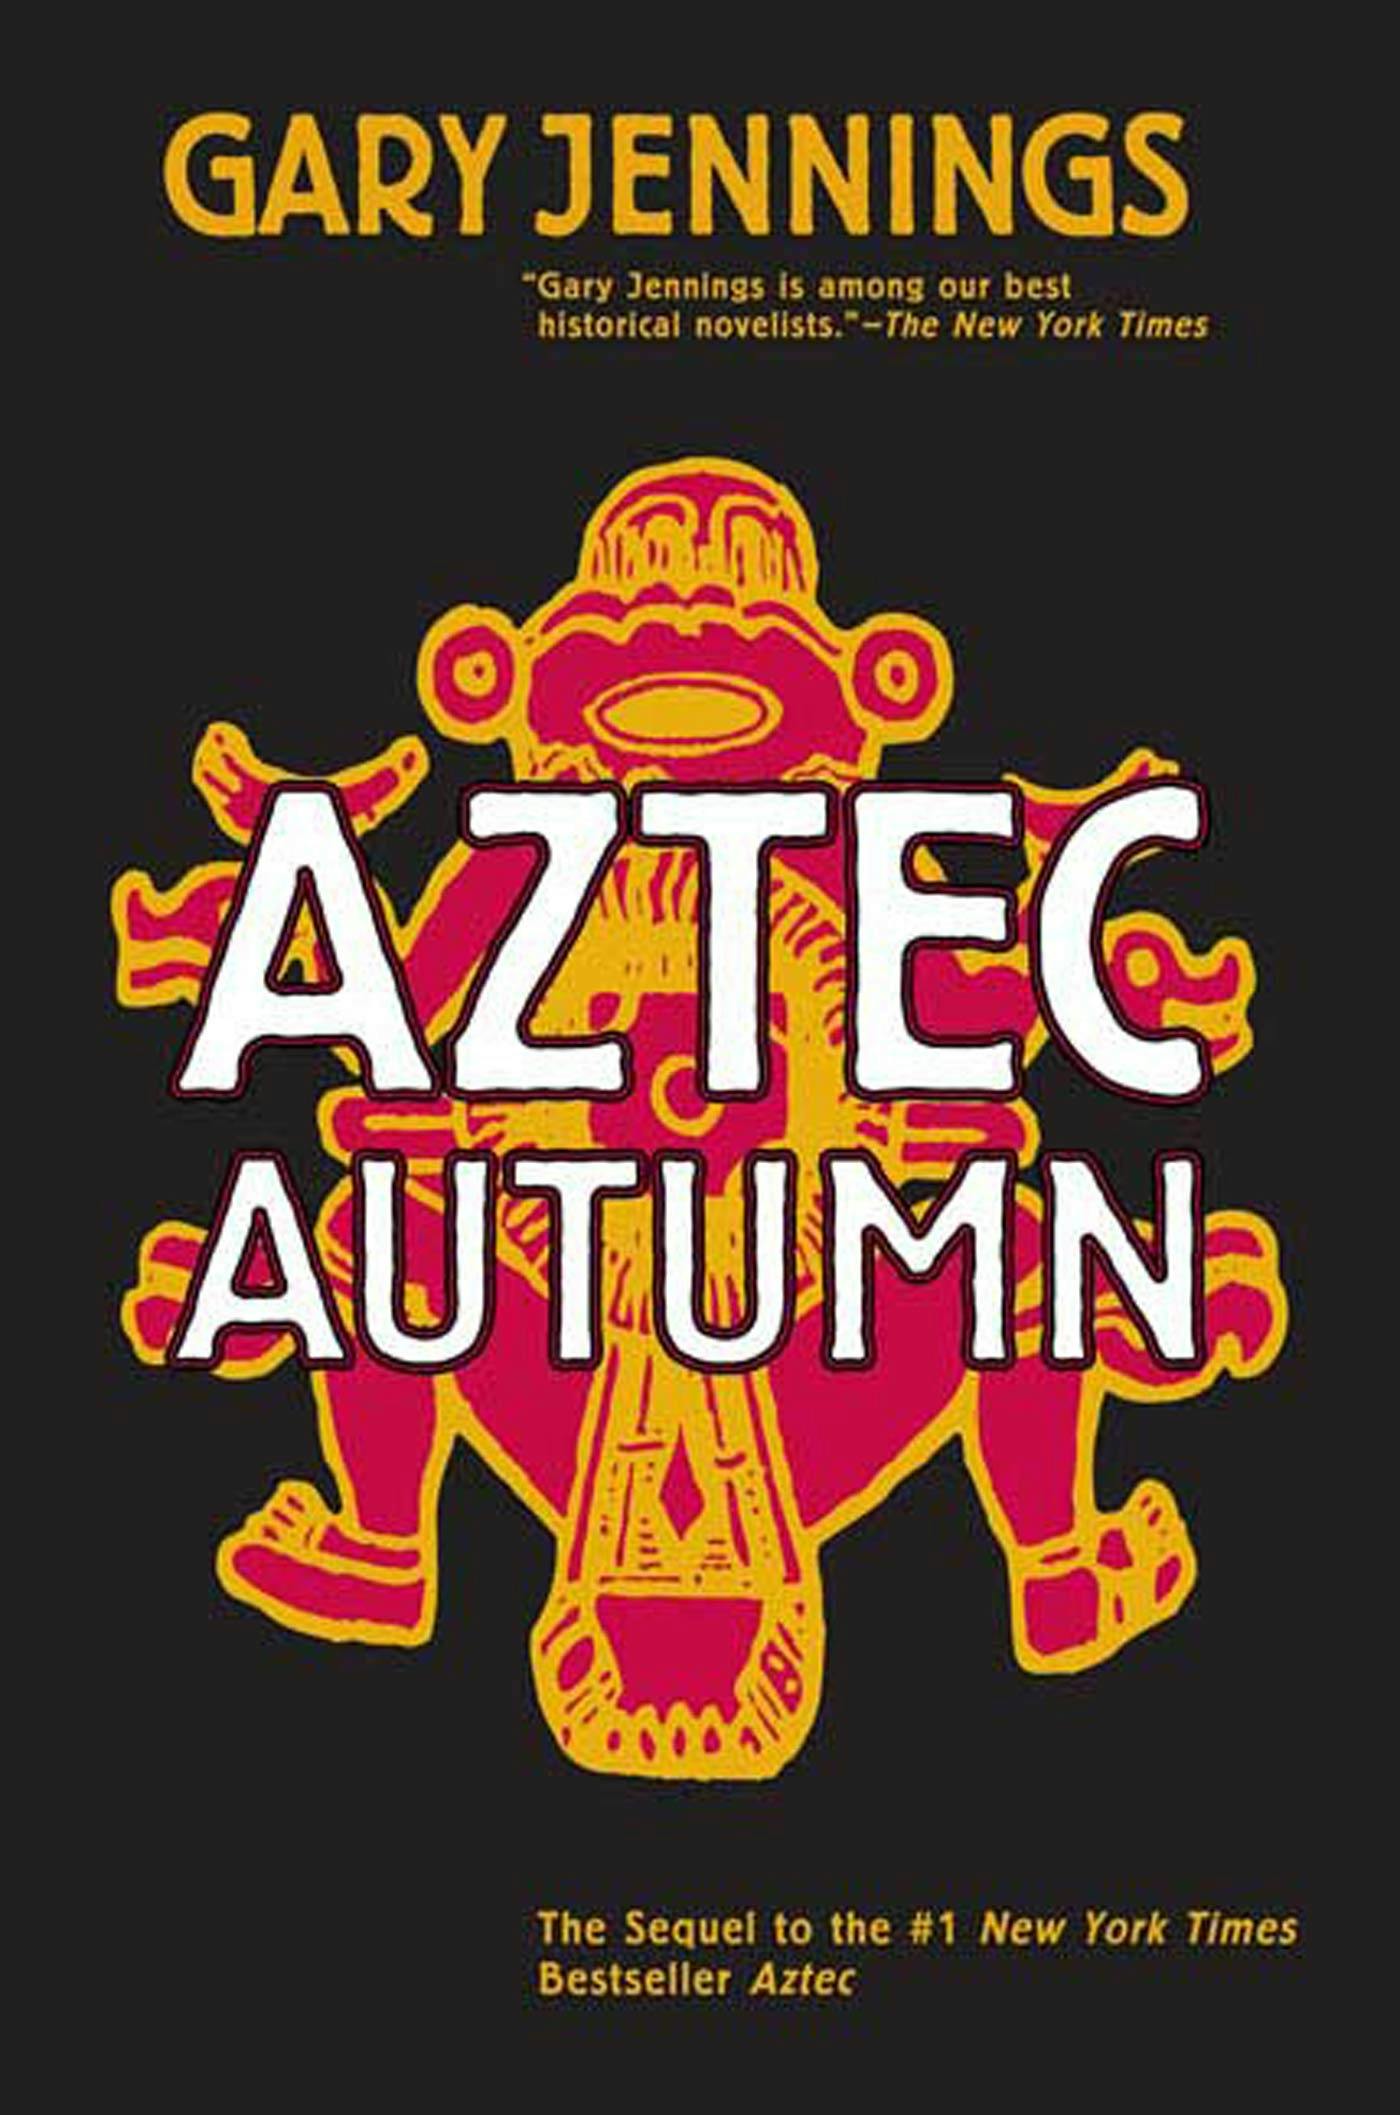 Cover for the book titled as: Aztec Autumn